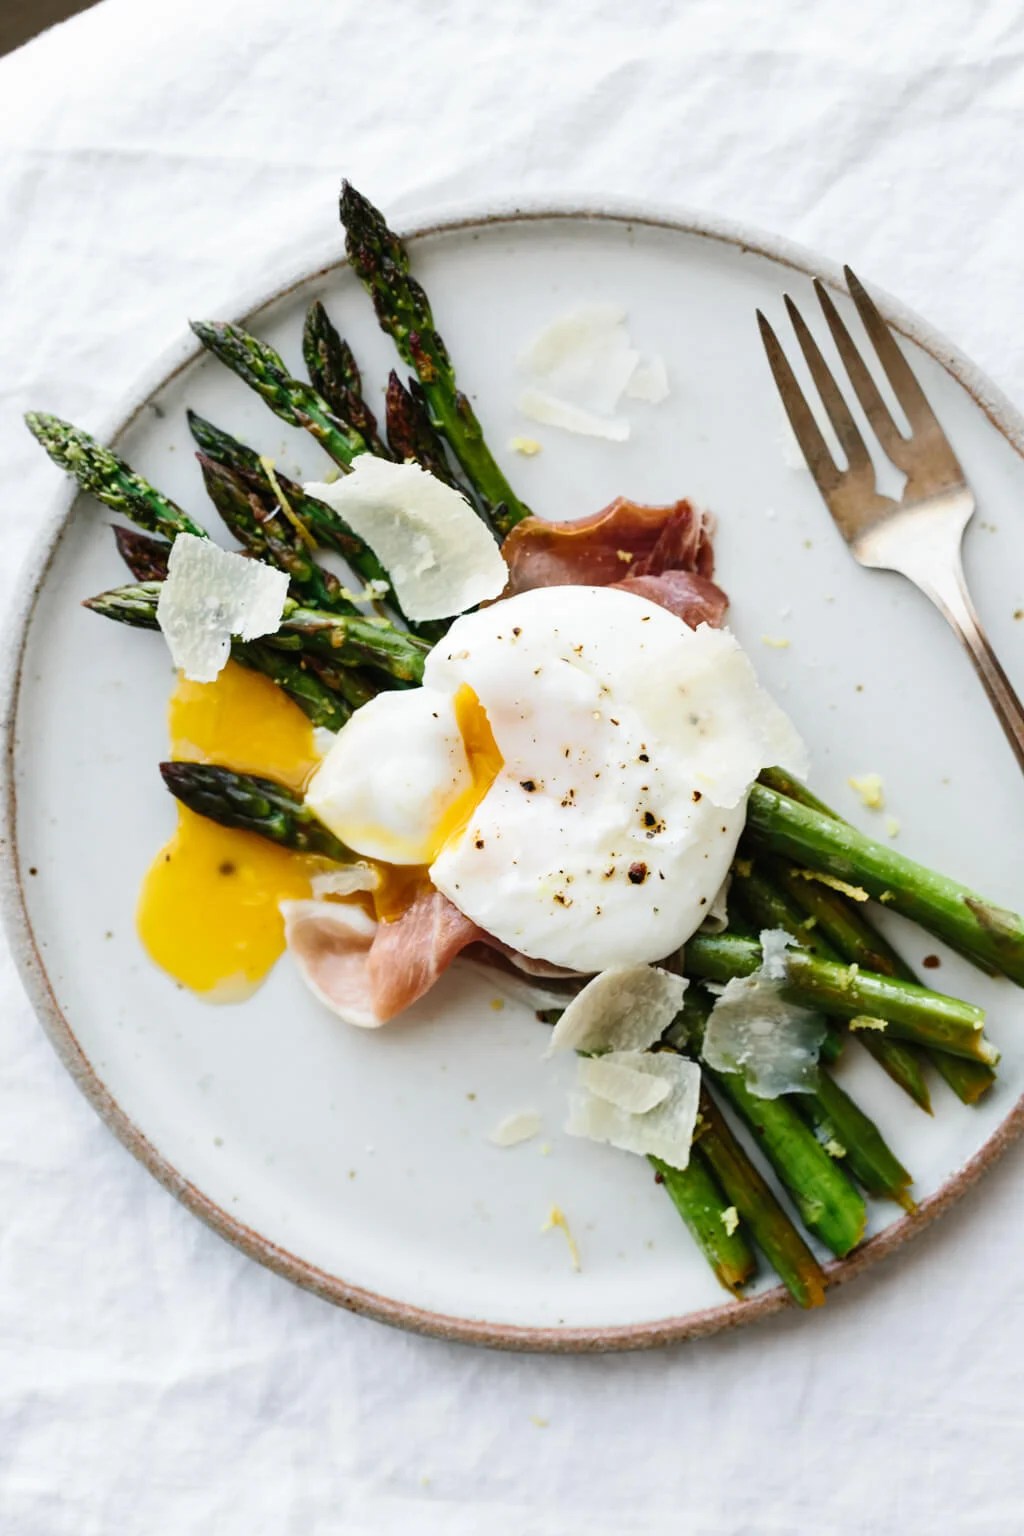 Breakfast doesn't get much better than garlic sautéed asparagus topped with prosciutto, a perfectly poached egg and a few shavings of parmesan.